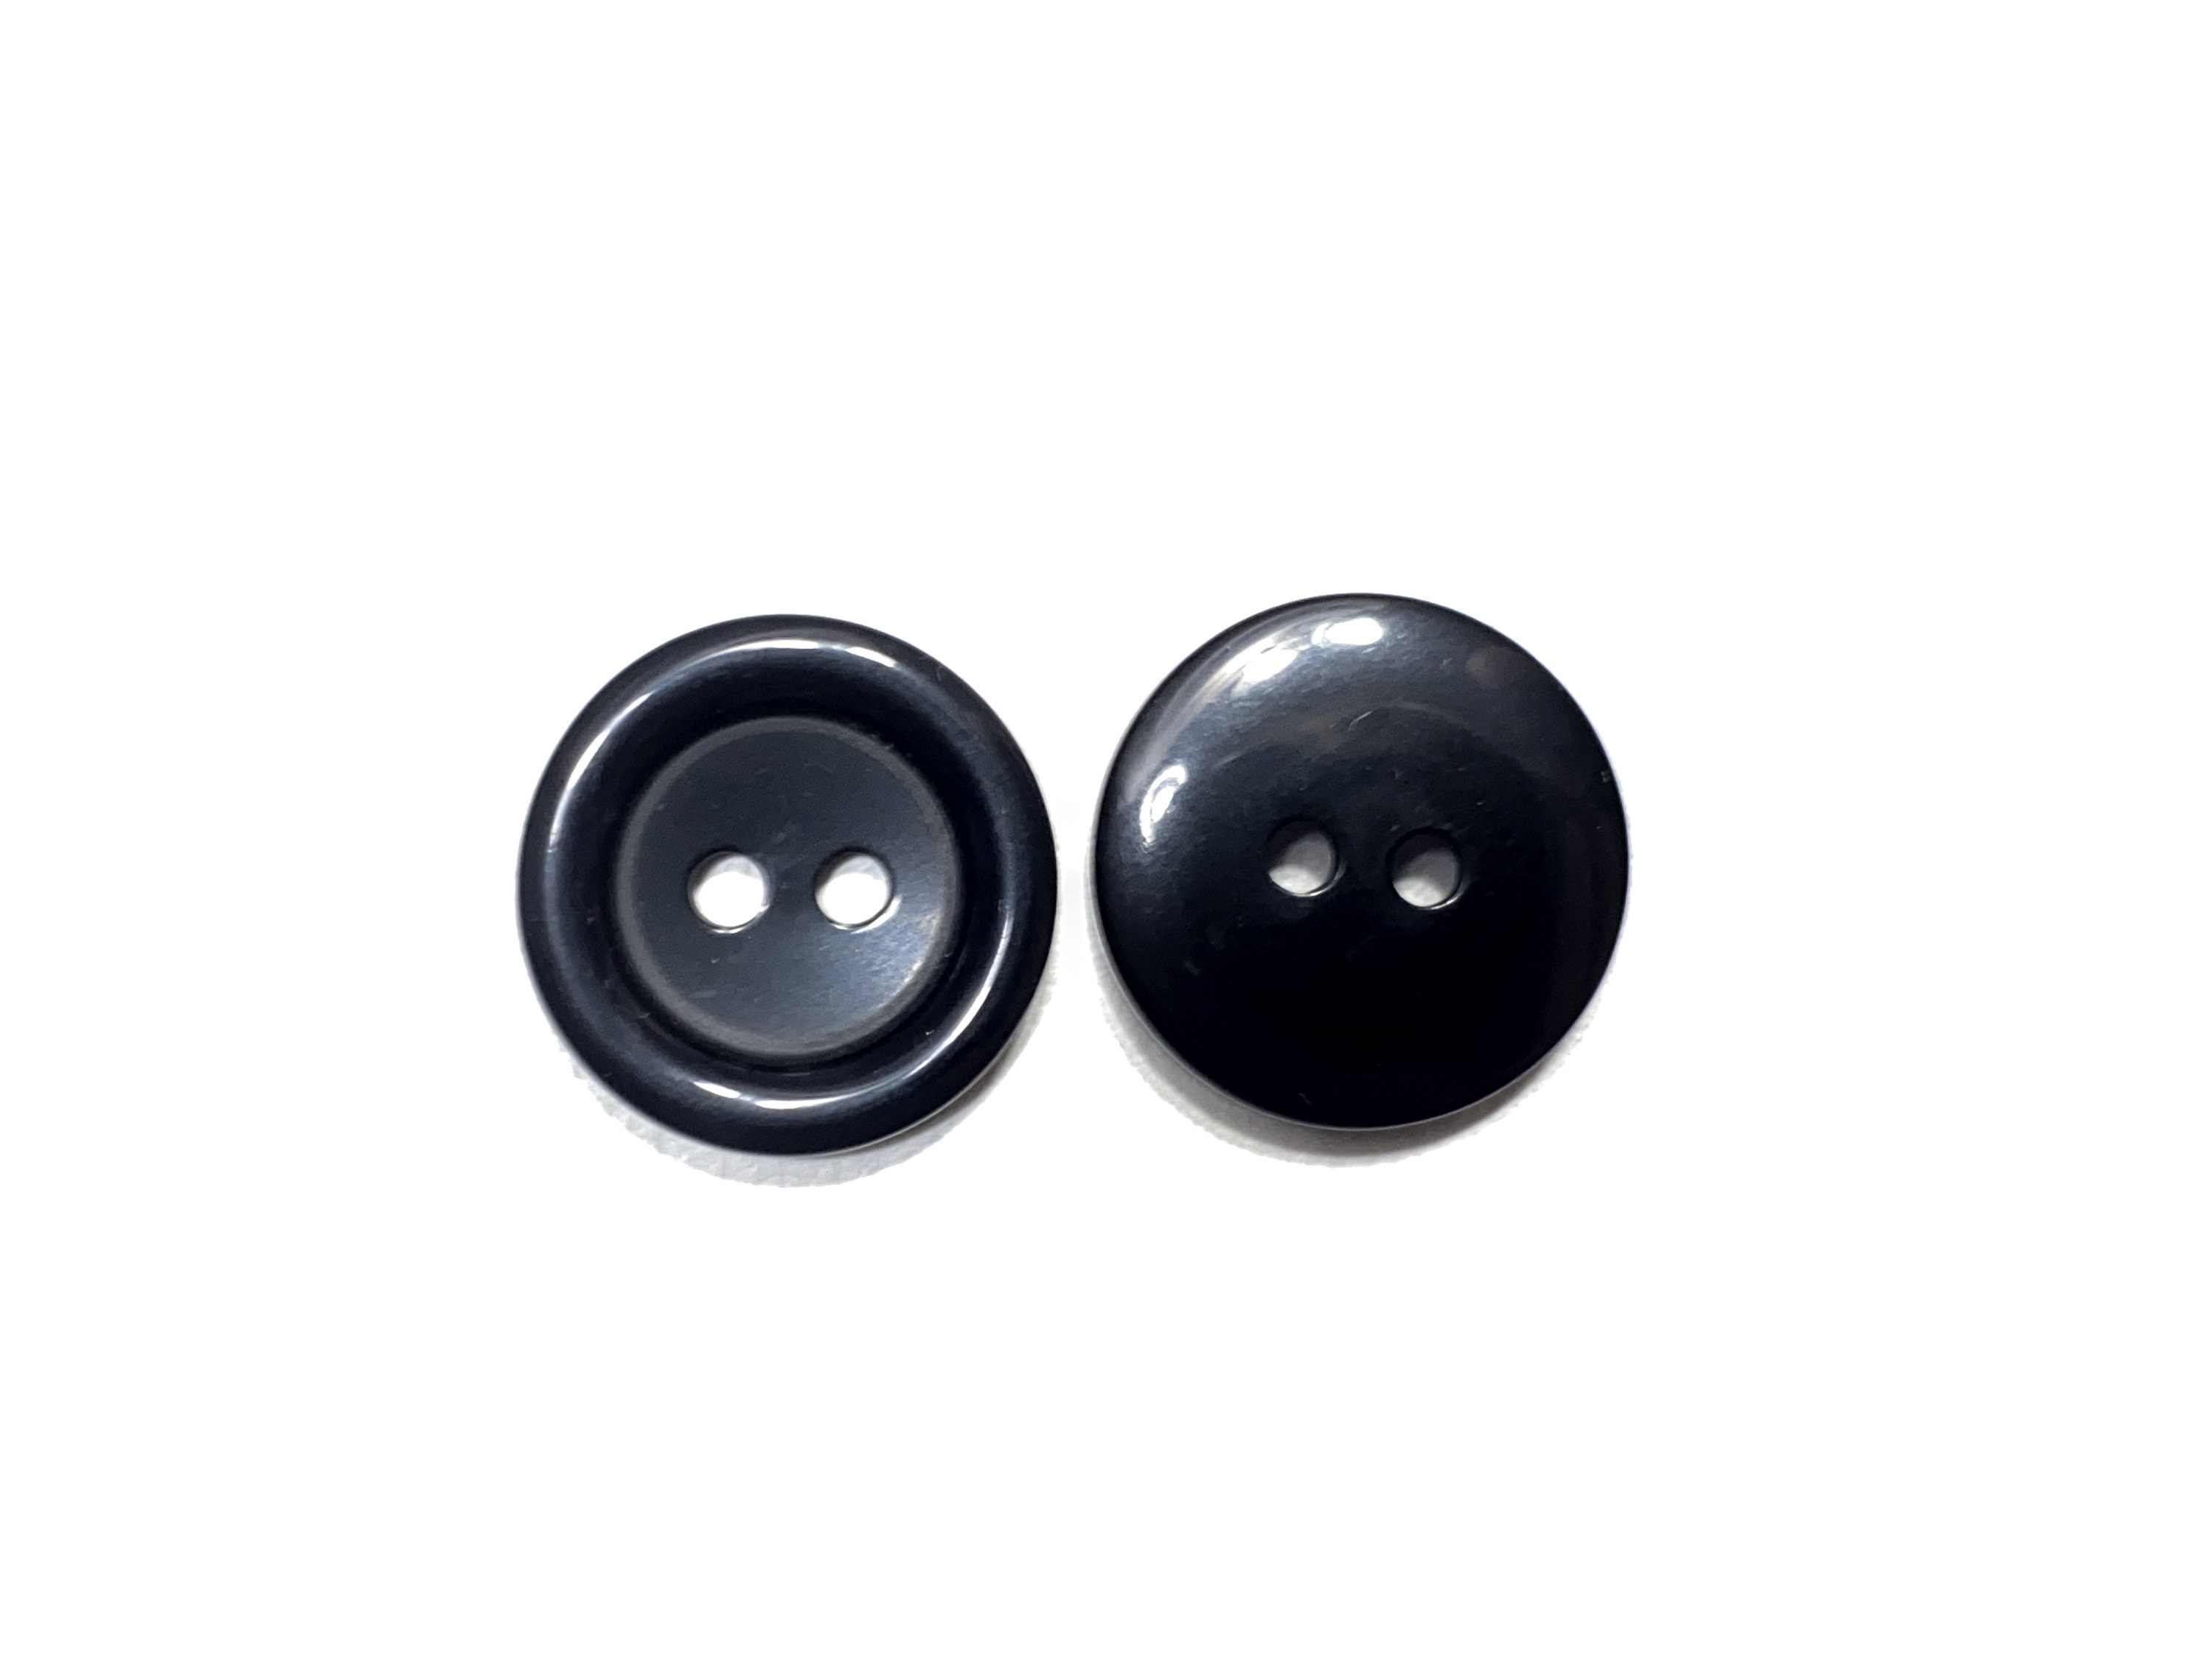 Black Buttons Pack 50g